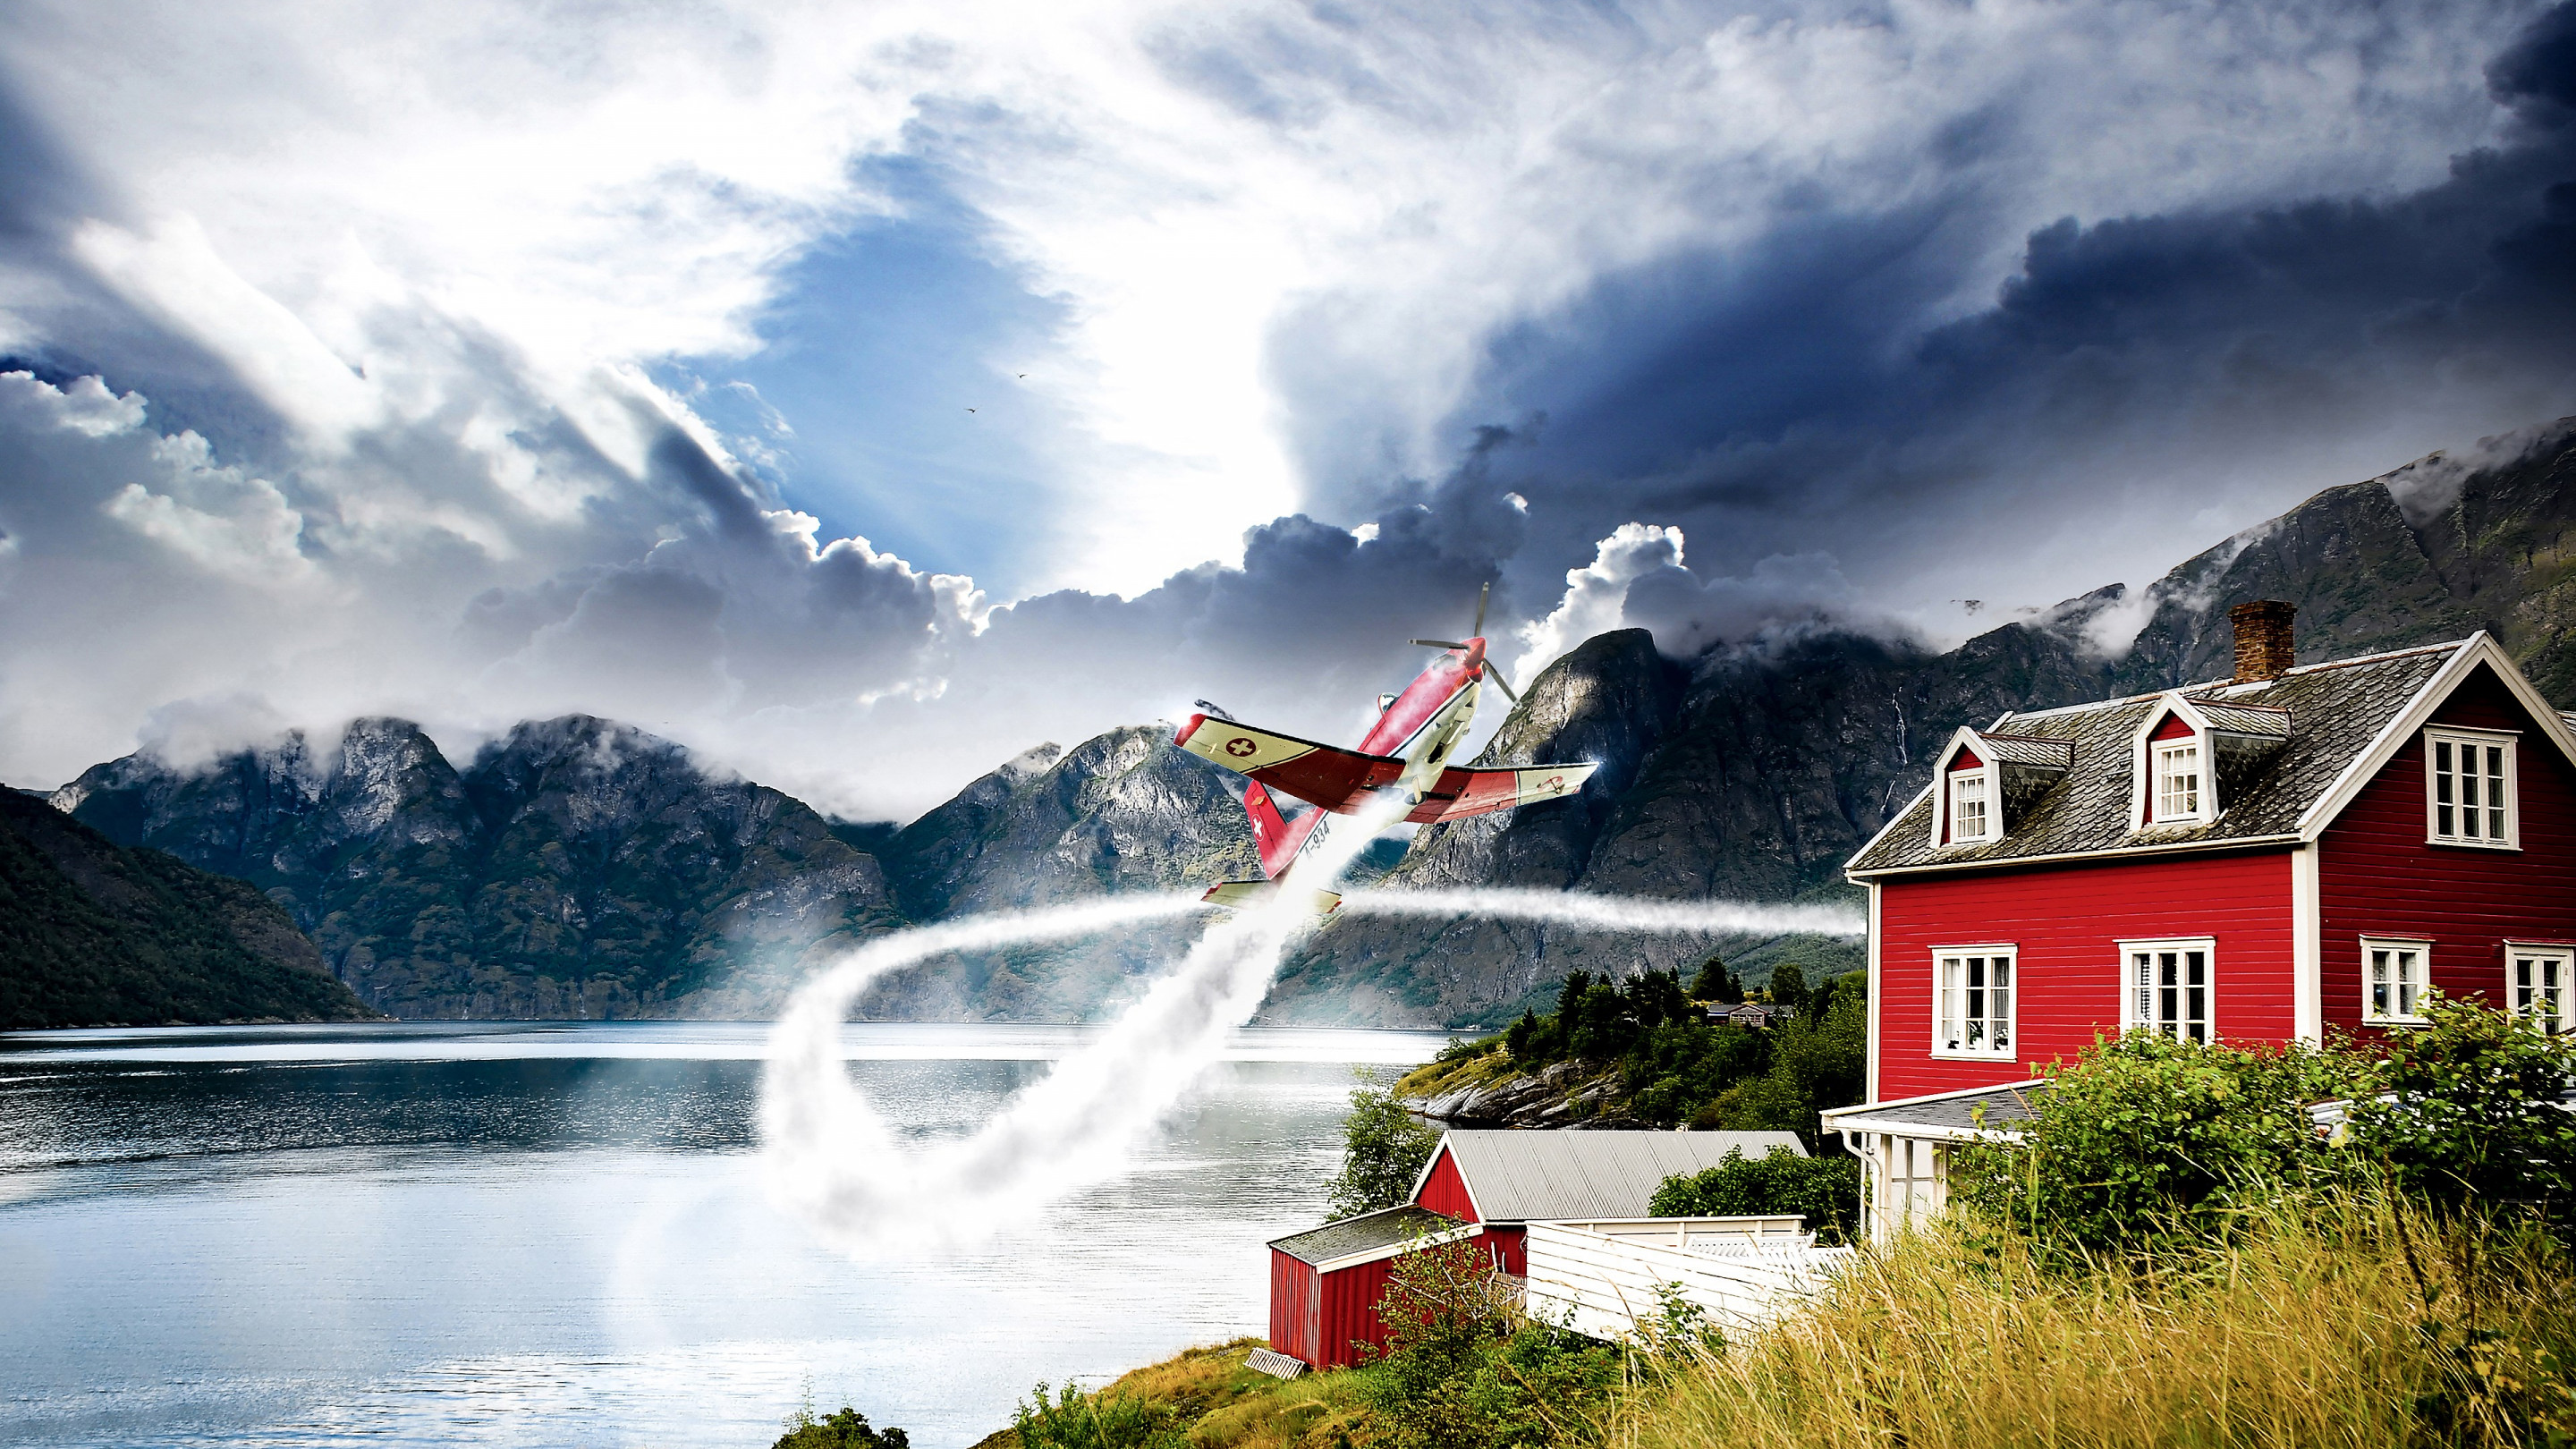 Norway vastness and one airplane wallpaper 2880x1620